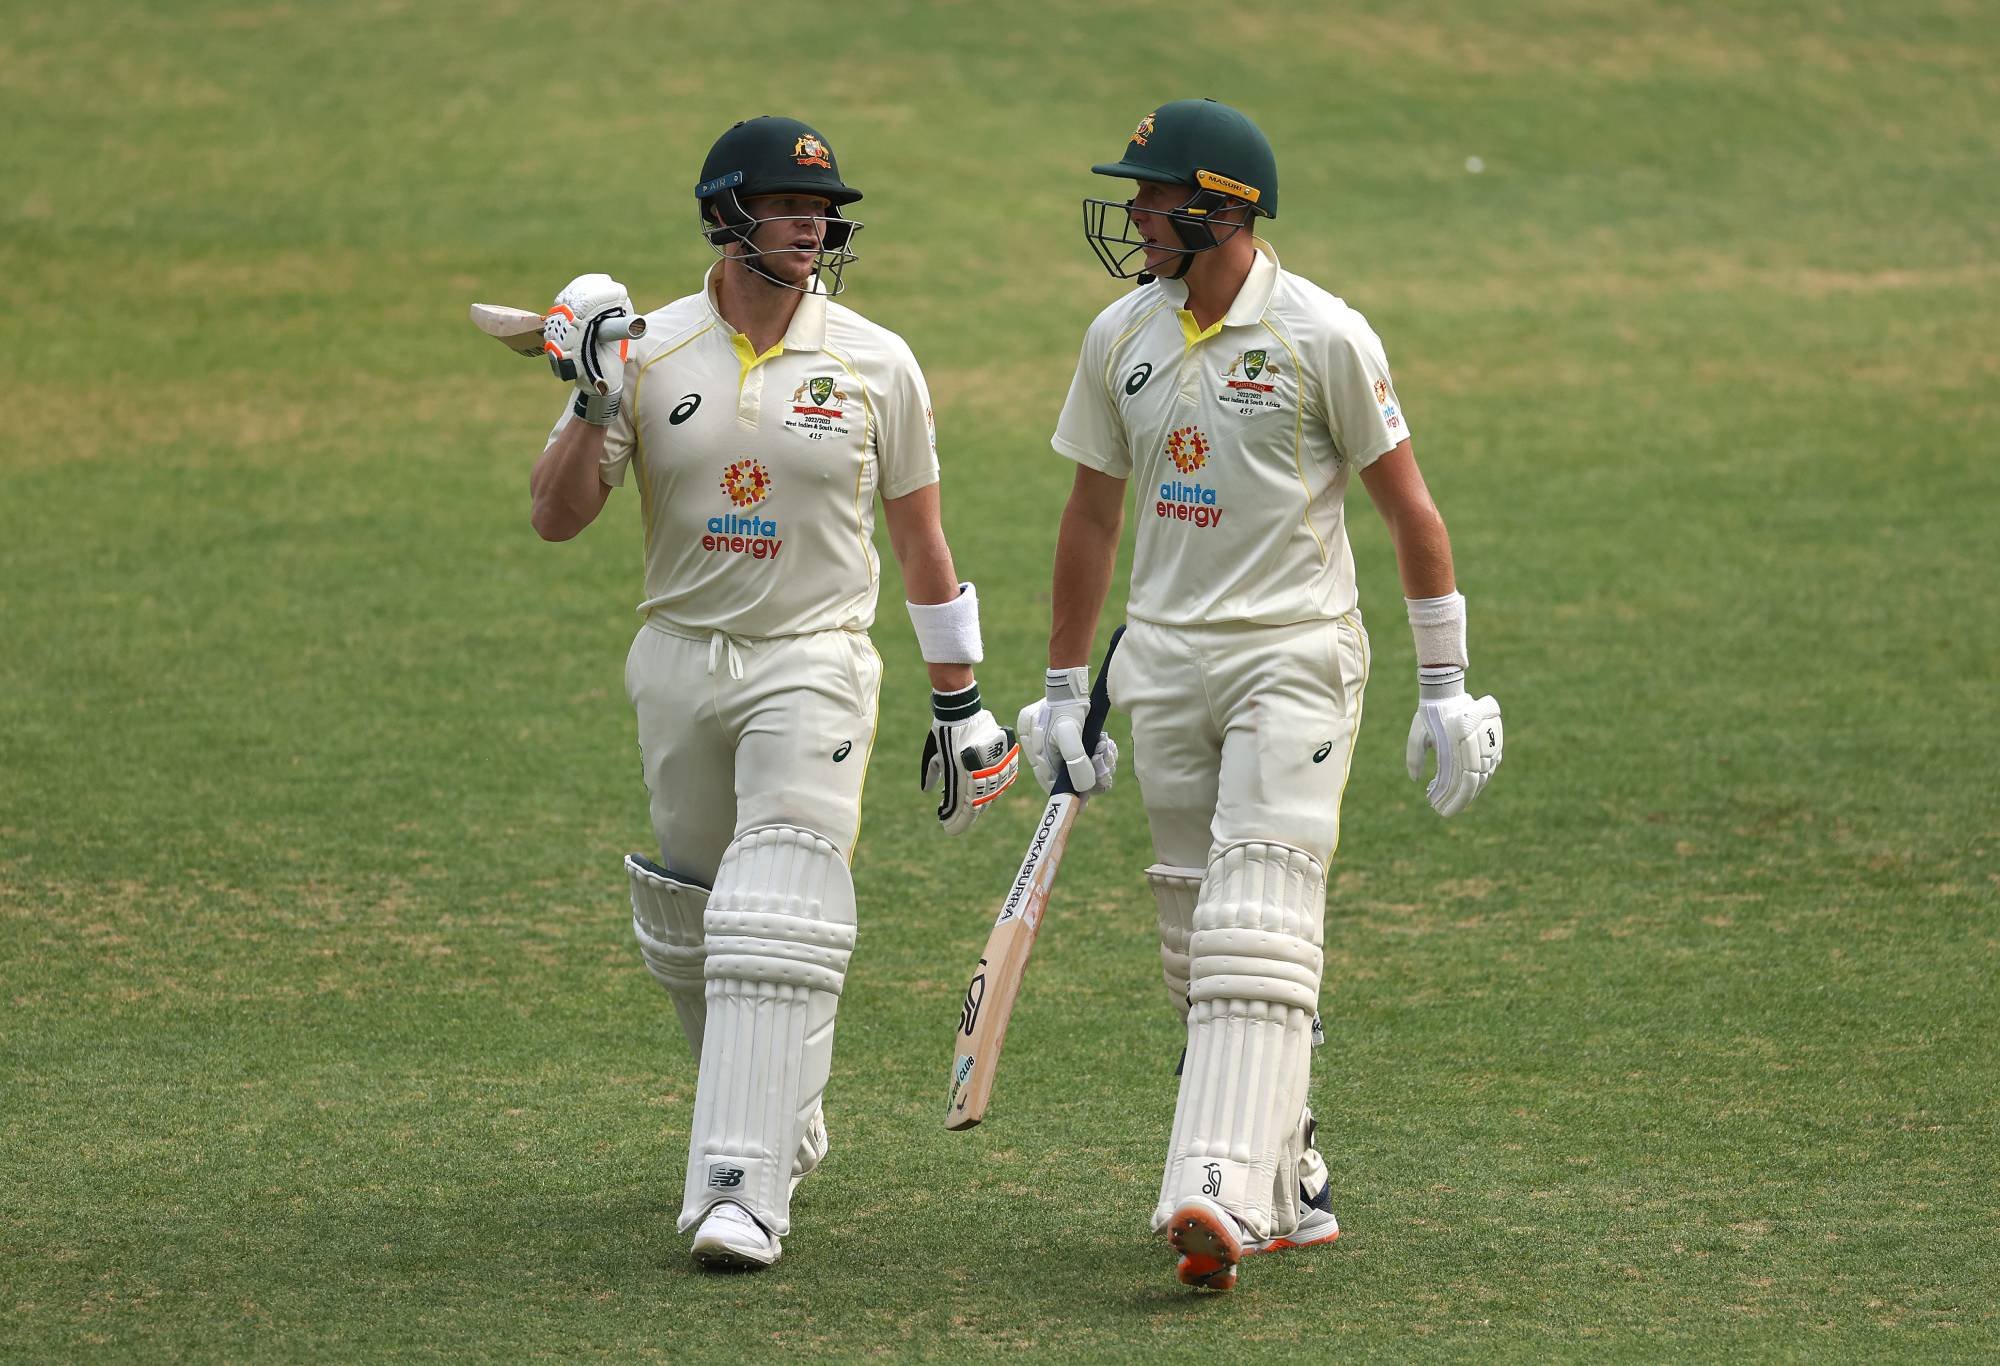 PERTH, AUSTRALIA - NOVEMBER 30: Marnus Labuschagne (R) and Steve Smith of Australia walk off the field after day one of the First Test match between Australia and the West Indies at Optus Stadium on November 30, 2022 in Perth, Australia. (Photo by Cameron Spencer/Getty Images)